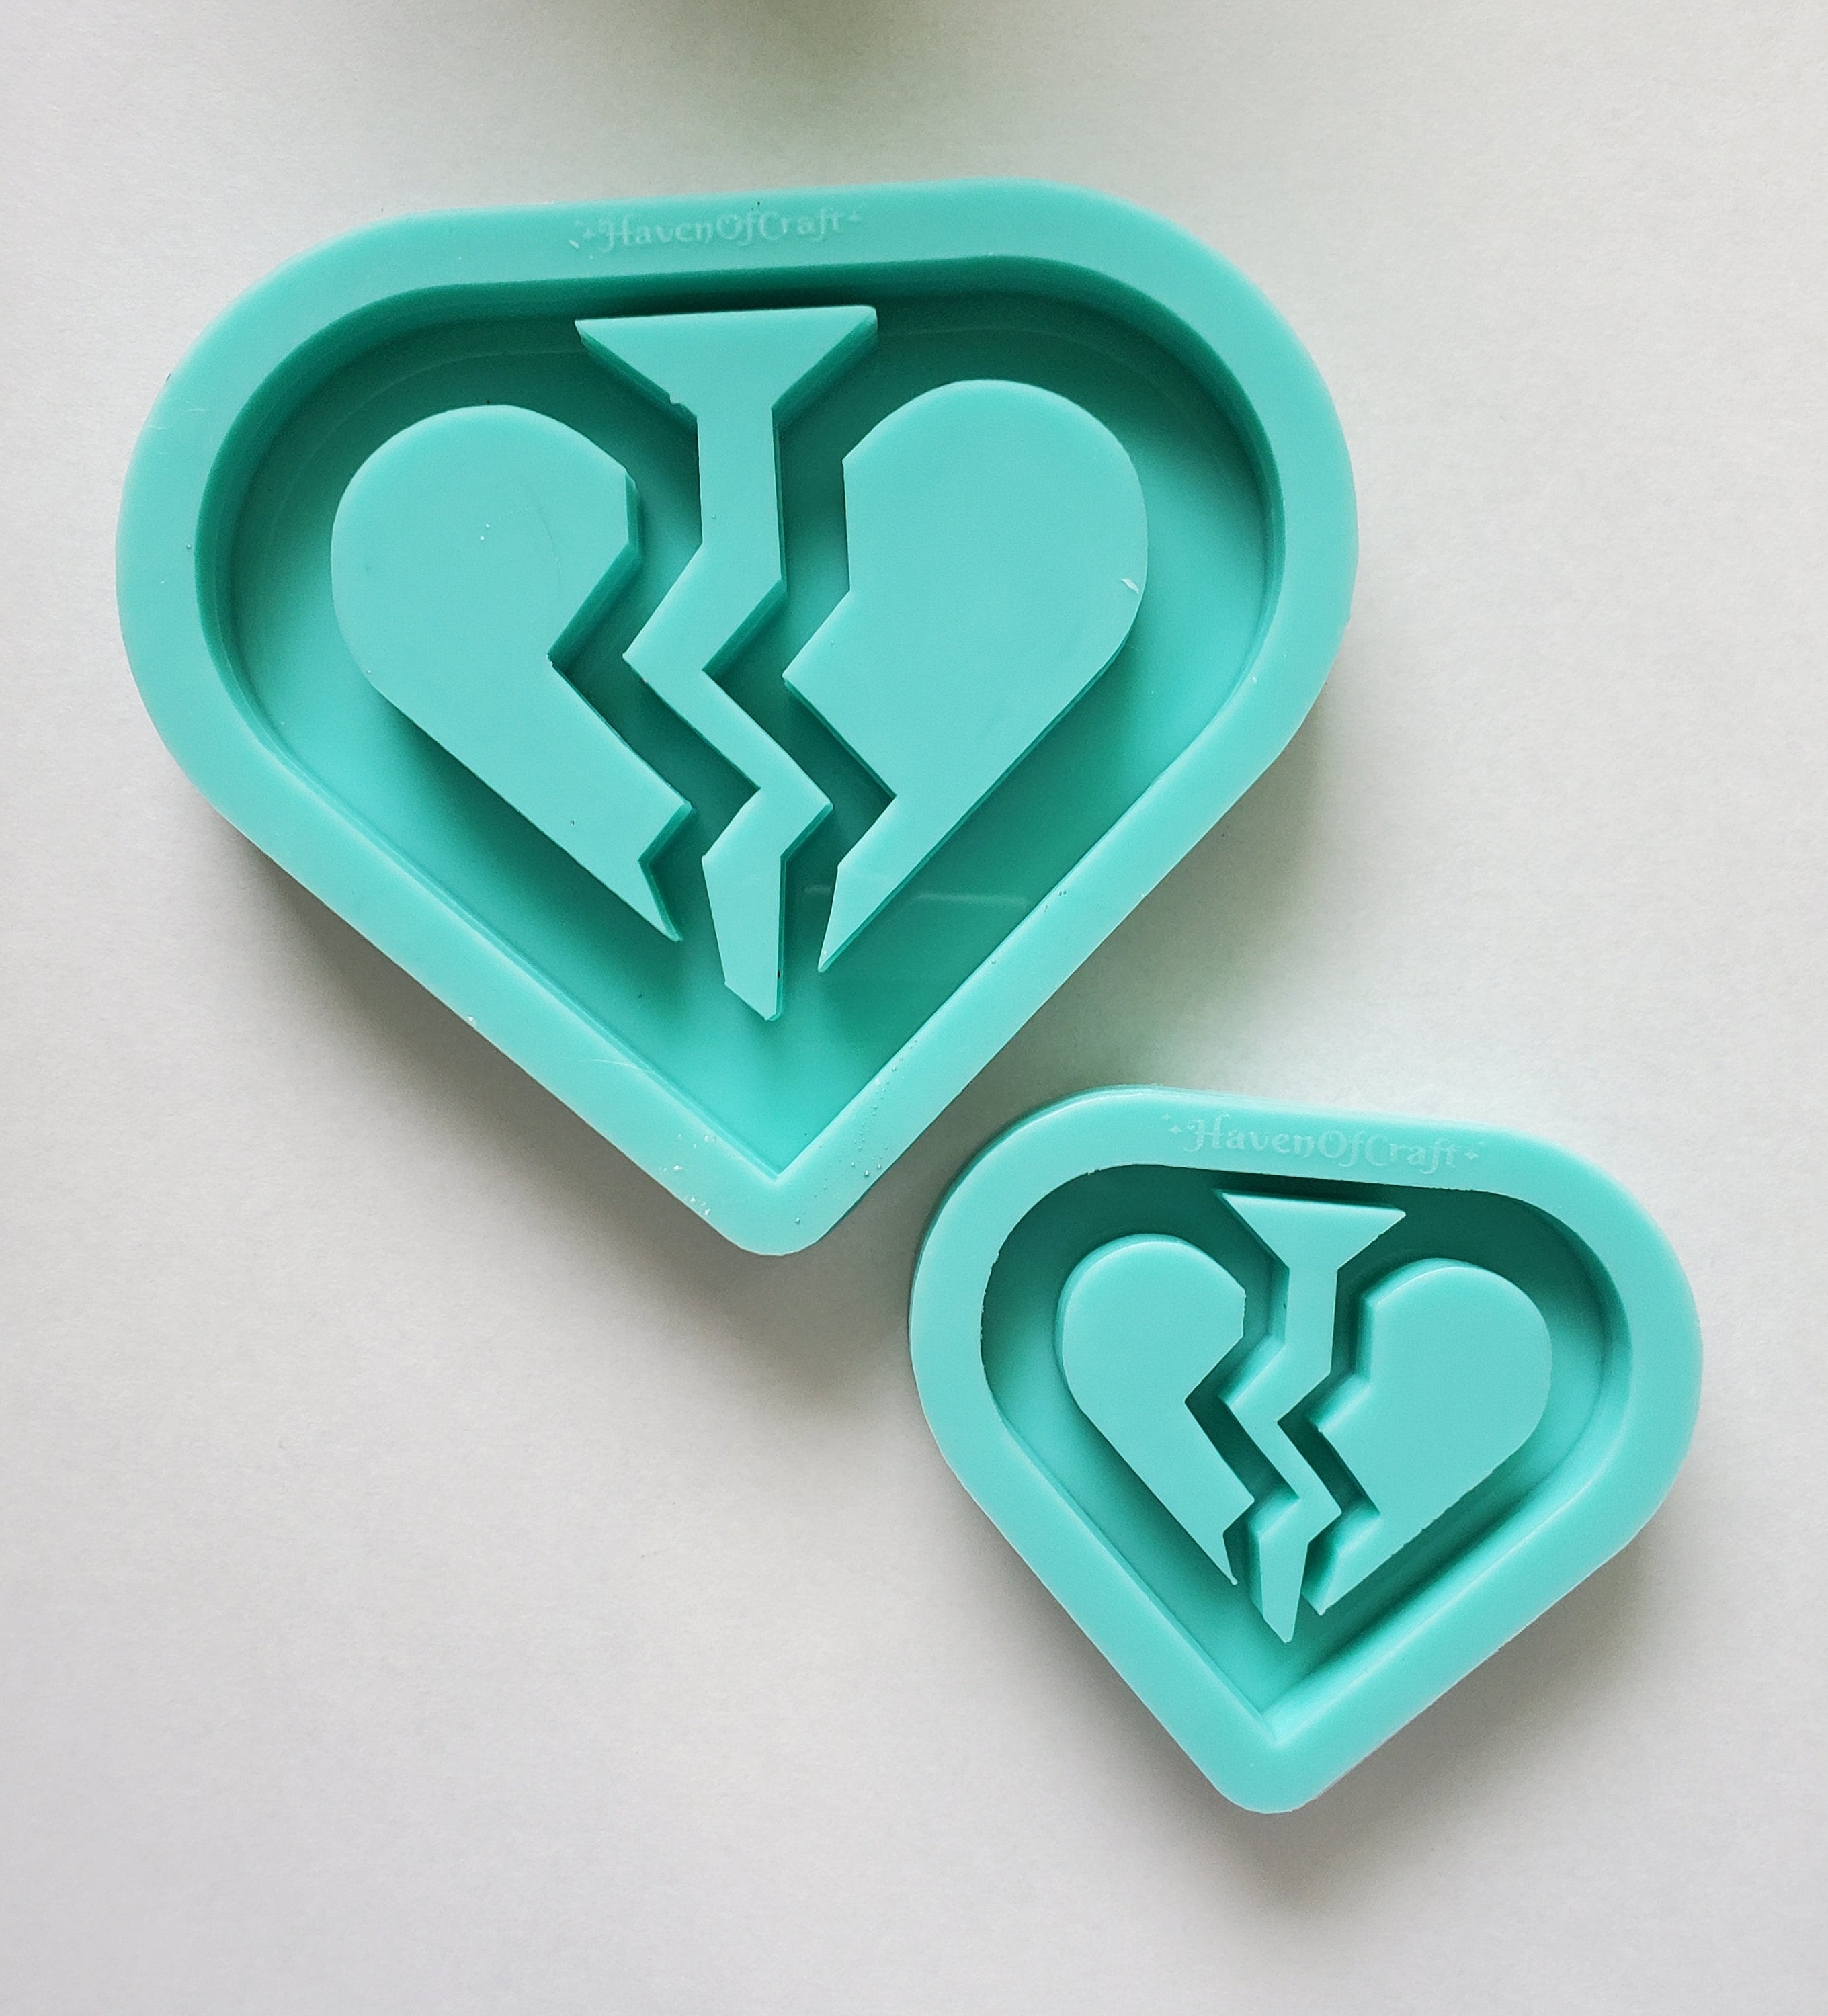 Resin Jewelry Molds,resin Molds Silicone for Creating Resin  Pendants,necklace,earring,keychain,diy Resin Epoxy Casting Craft 